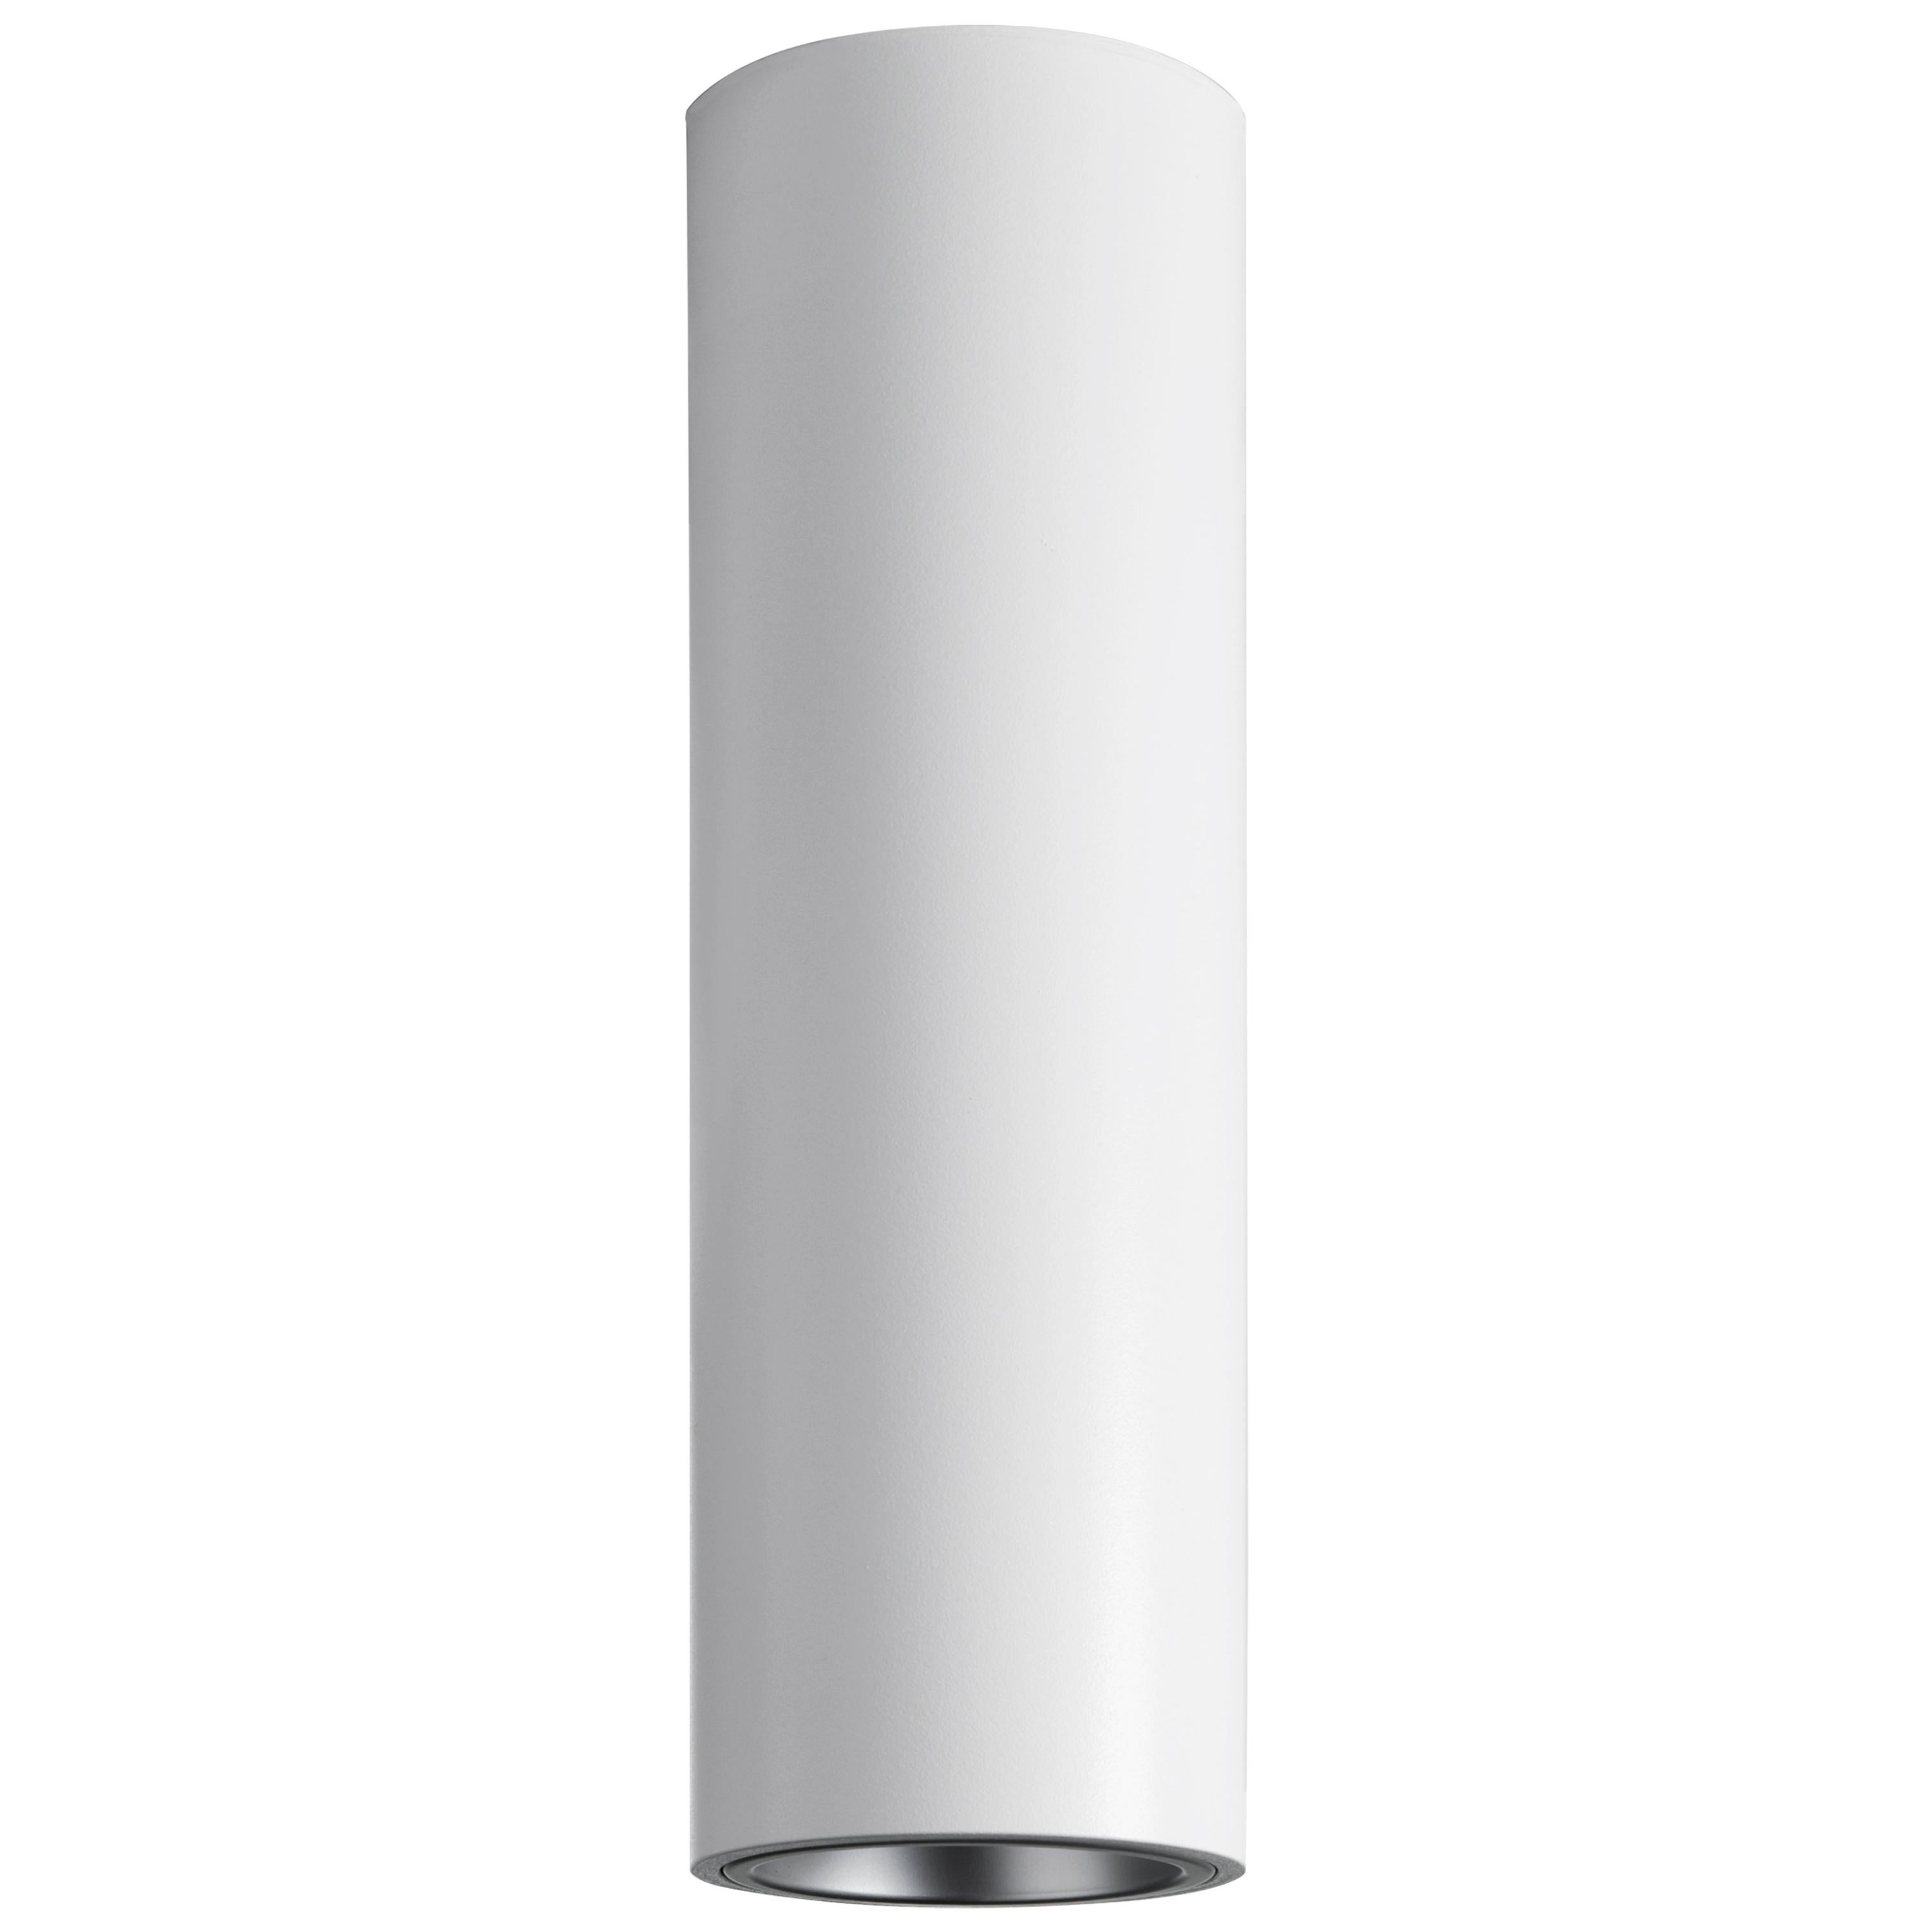 Tekna Tube Ceiling Light with White Lacquer Finish and Chrome Reflector For Sale